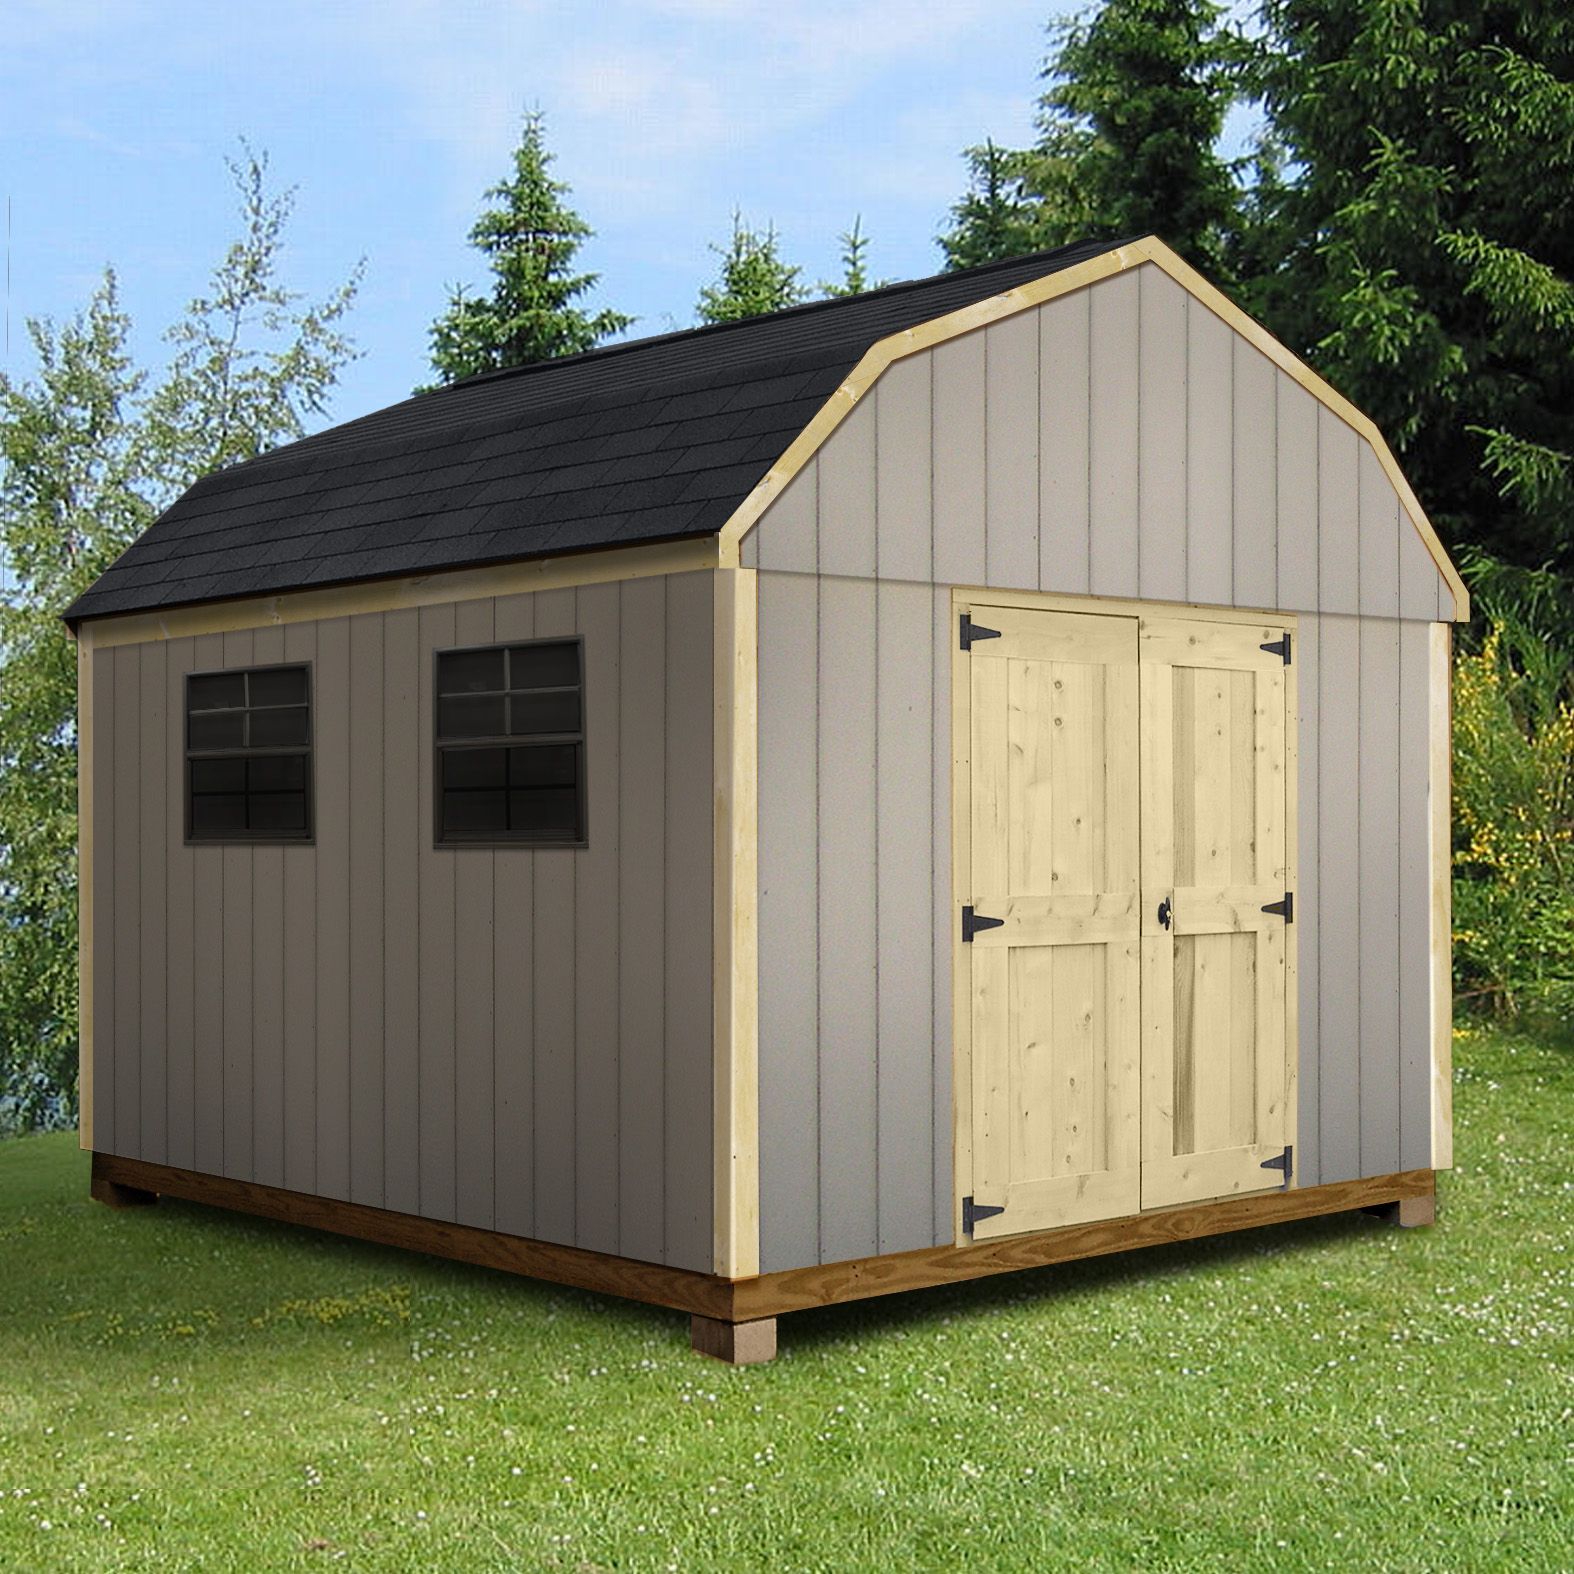 T1012SB Smart Siding Barn (10 ft. x 12 ft.) - Professional Installation Included